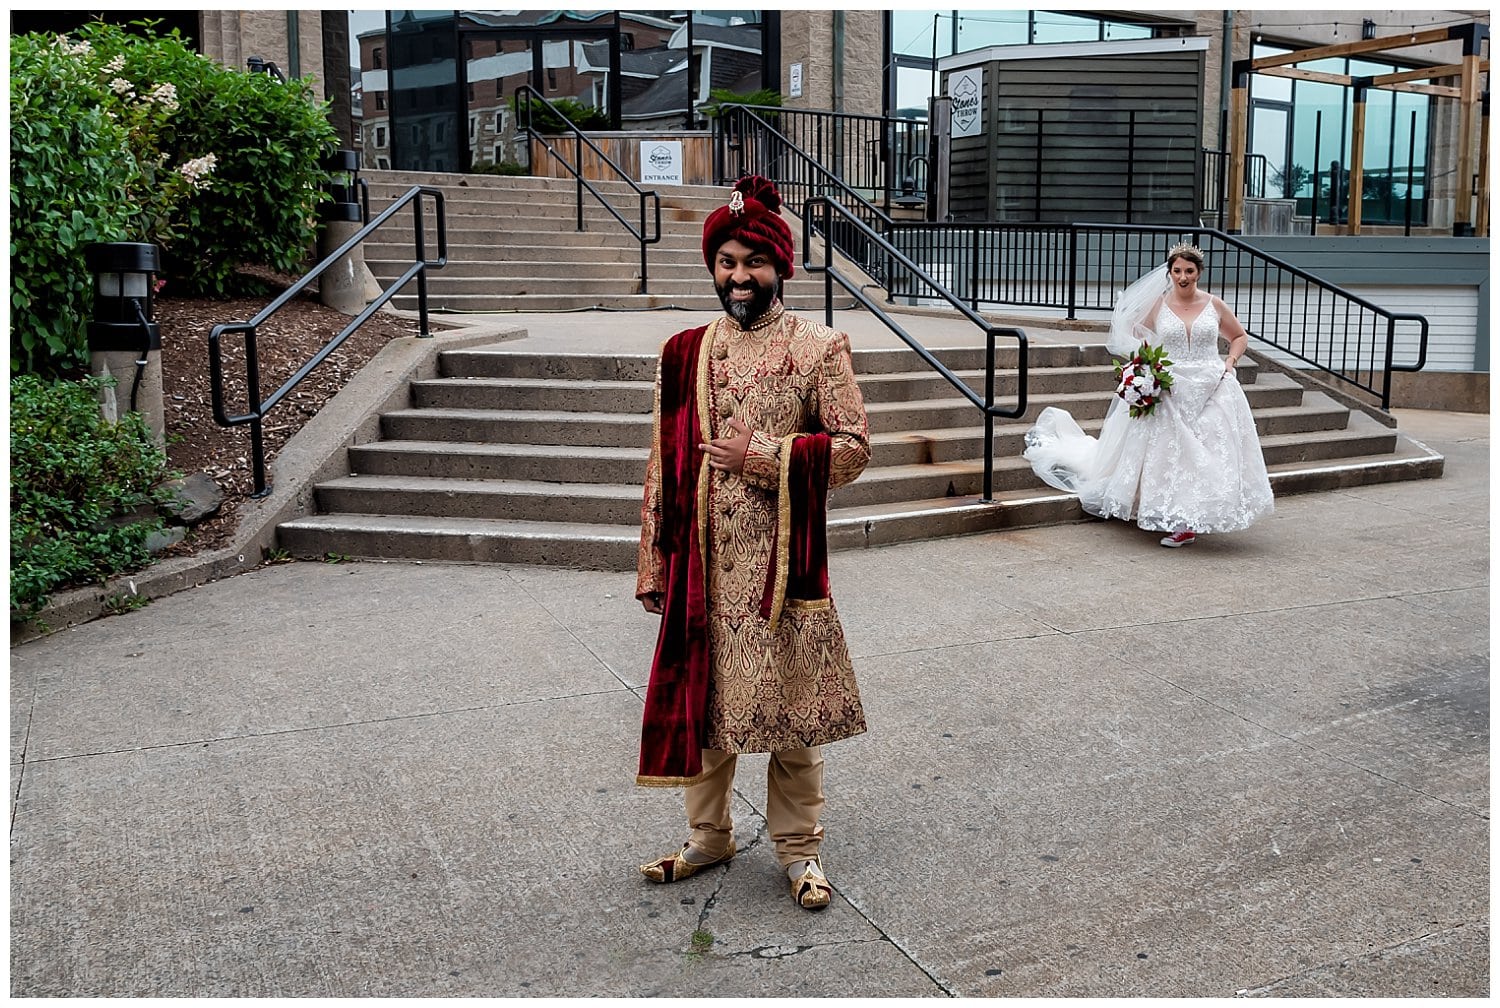 The groom waits for his bride to arrive for their first look outside the Halifax Marriott Harbourfront Hotel.